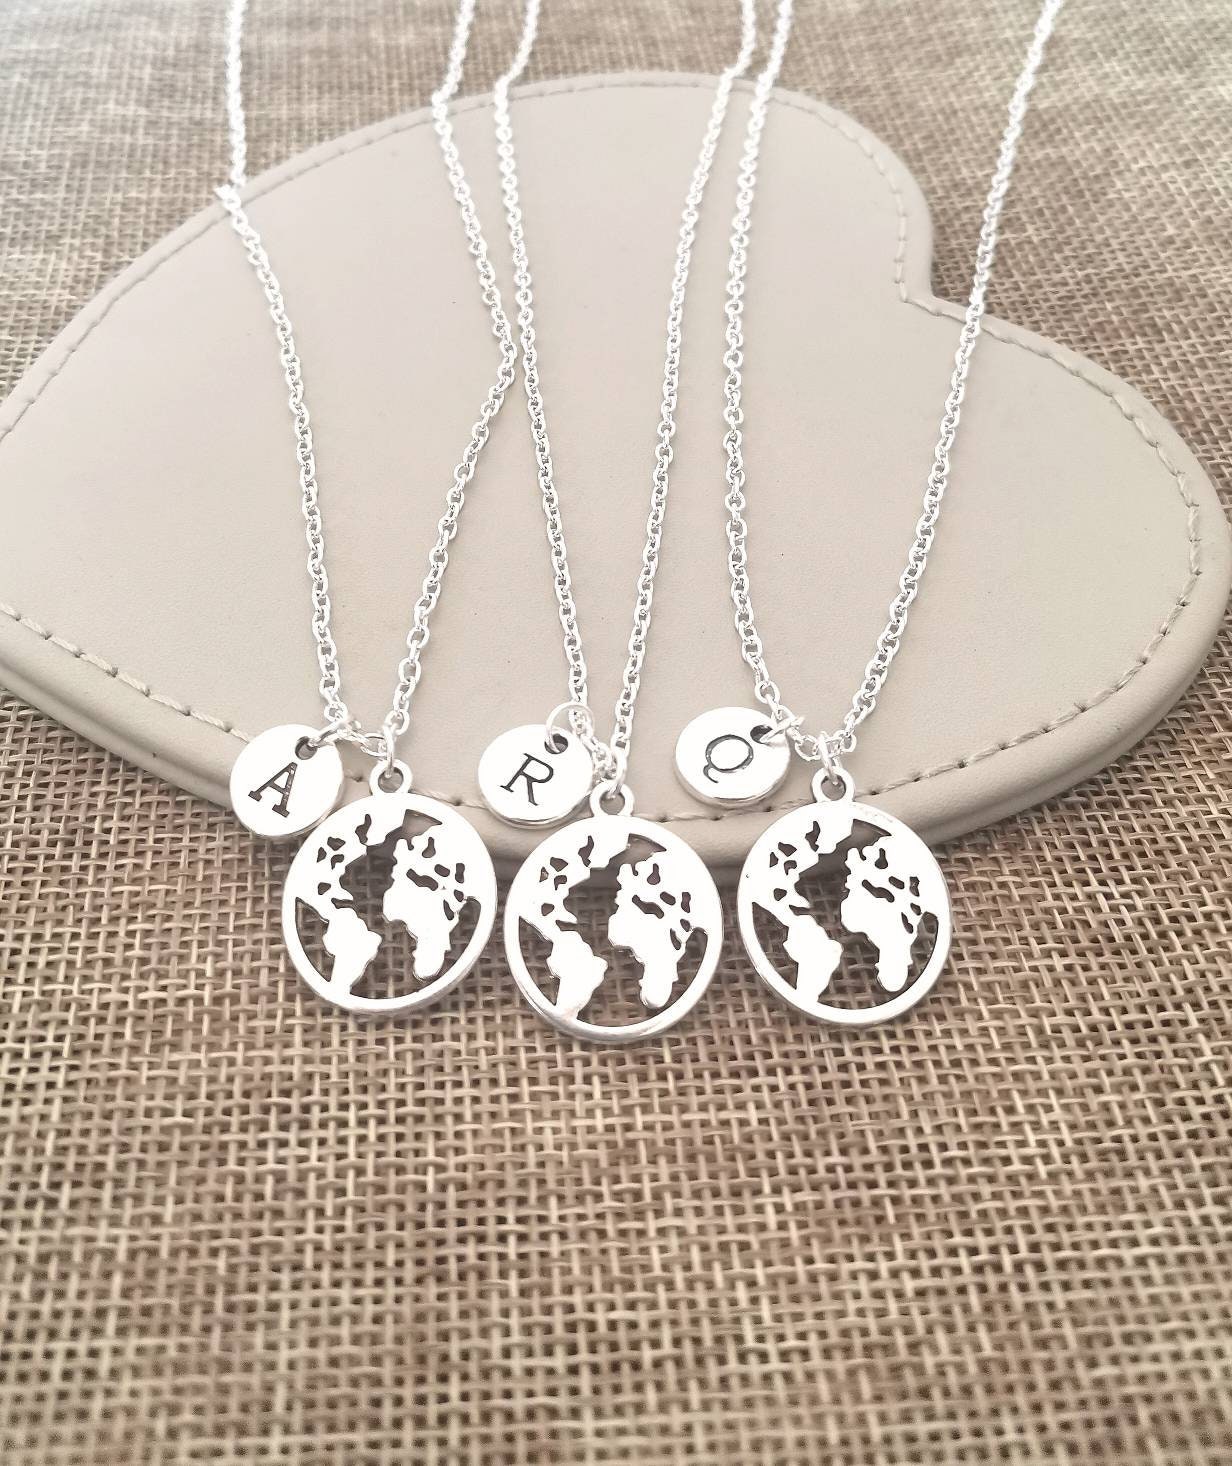 Friendship Necklace for 3 3 Best Friend Necklace 3 Way - Etsy